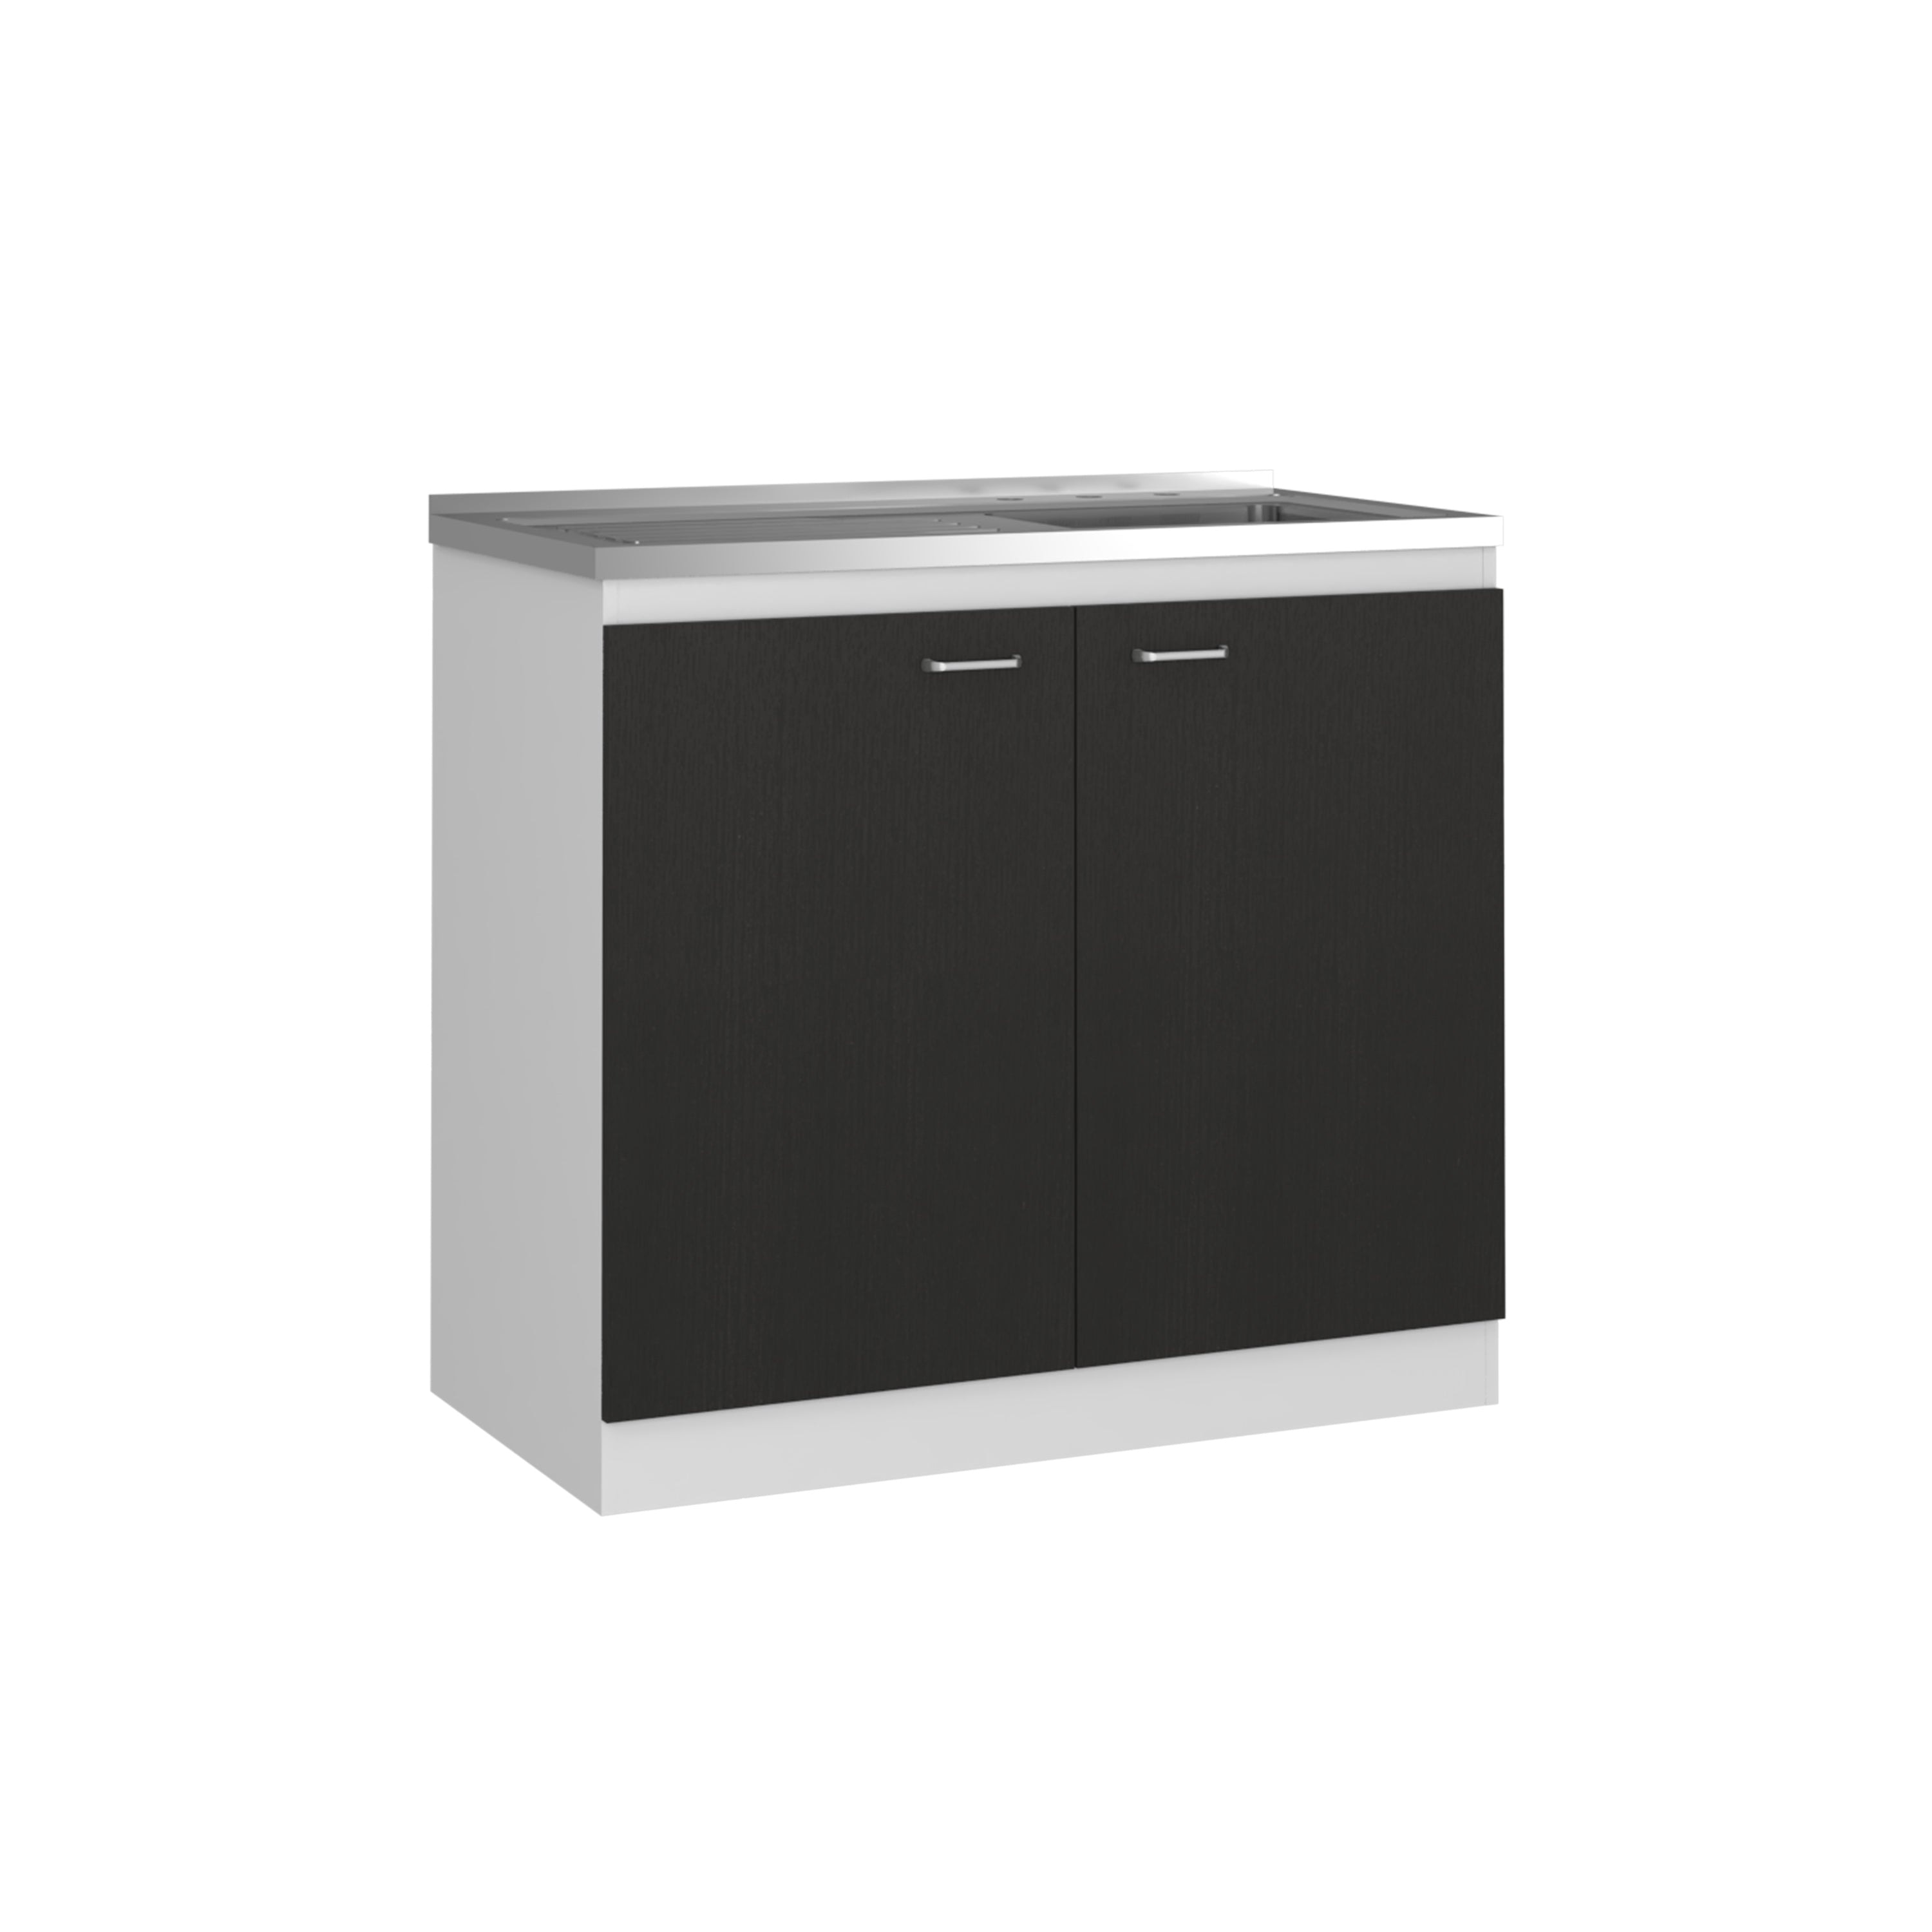 https://ak1.ostkcdn.com/images/products/is/images/direct/46e70cb242abae81e7cbaa0b05323d1e33ee16c0/TUHOME-Napoles-Utility-Sink-Cabinet-with-2-Inner-Shelves.jpg